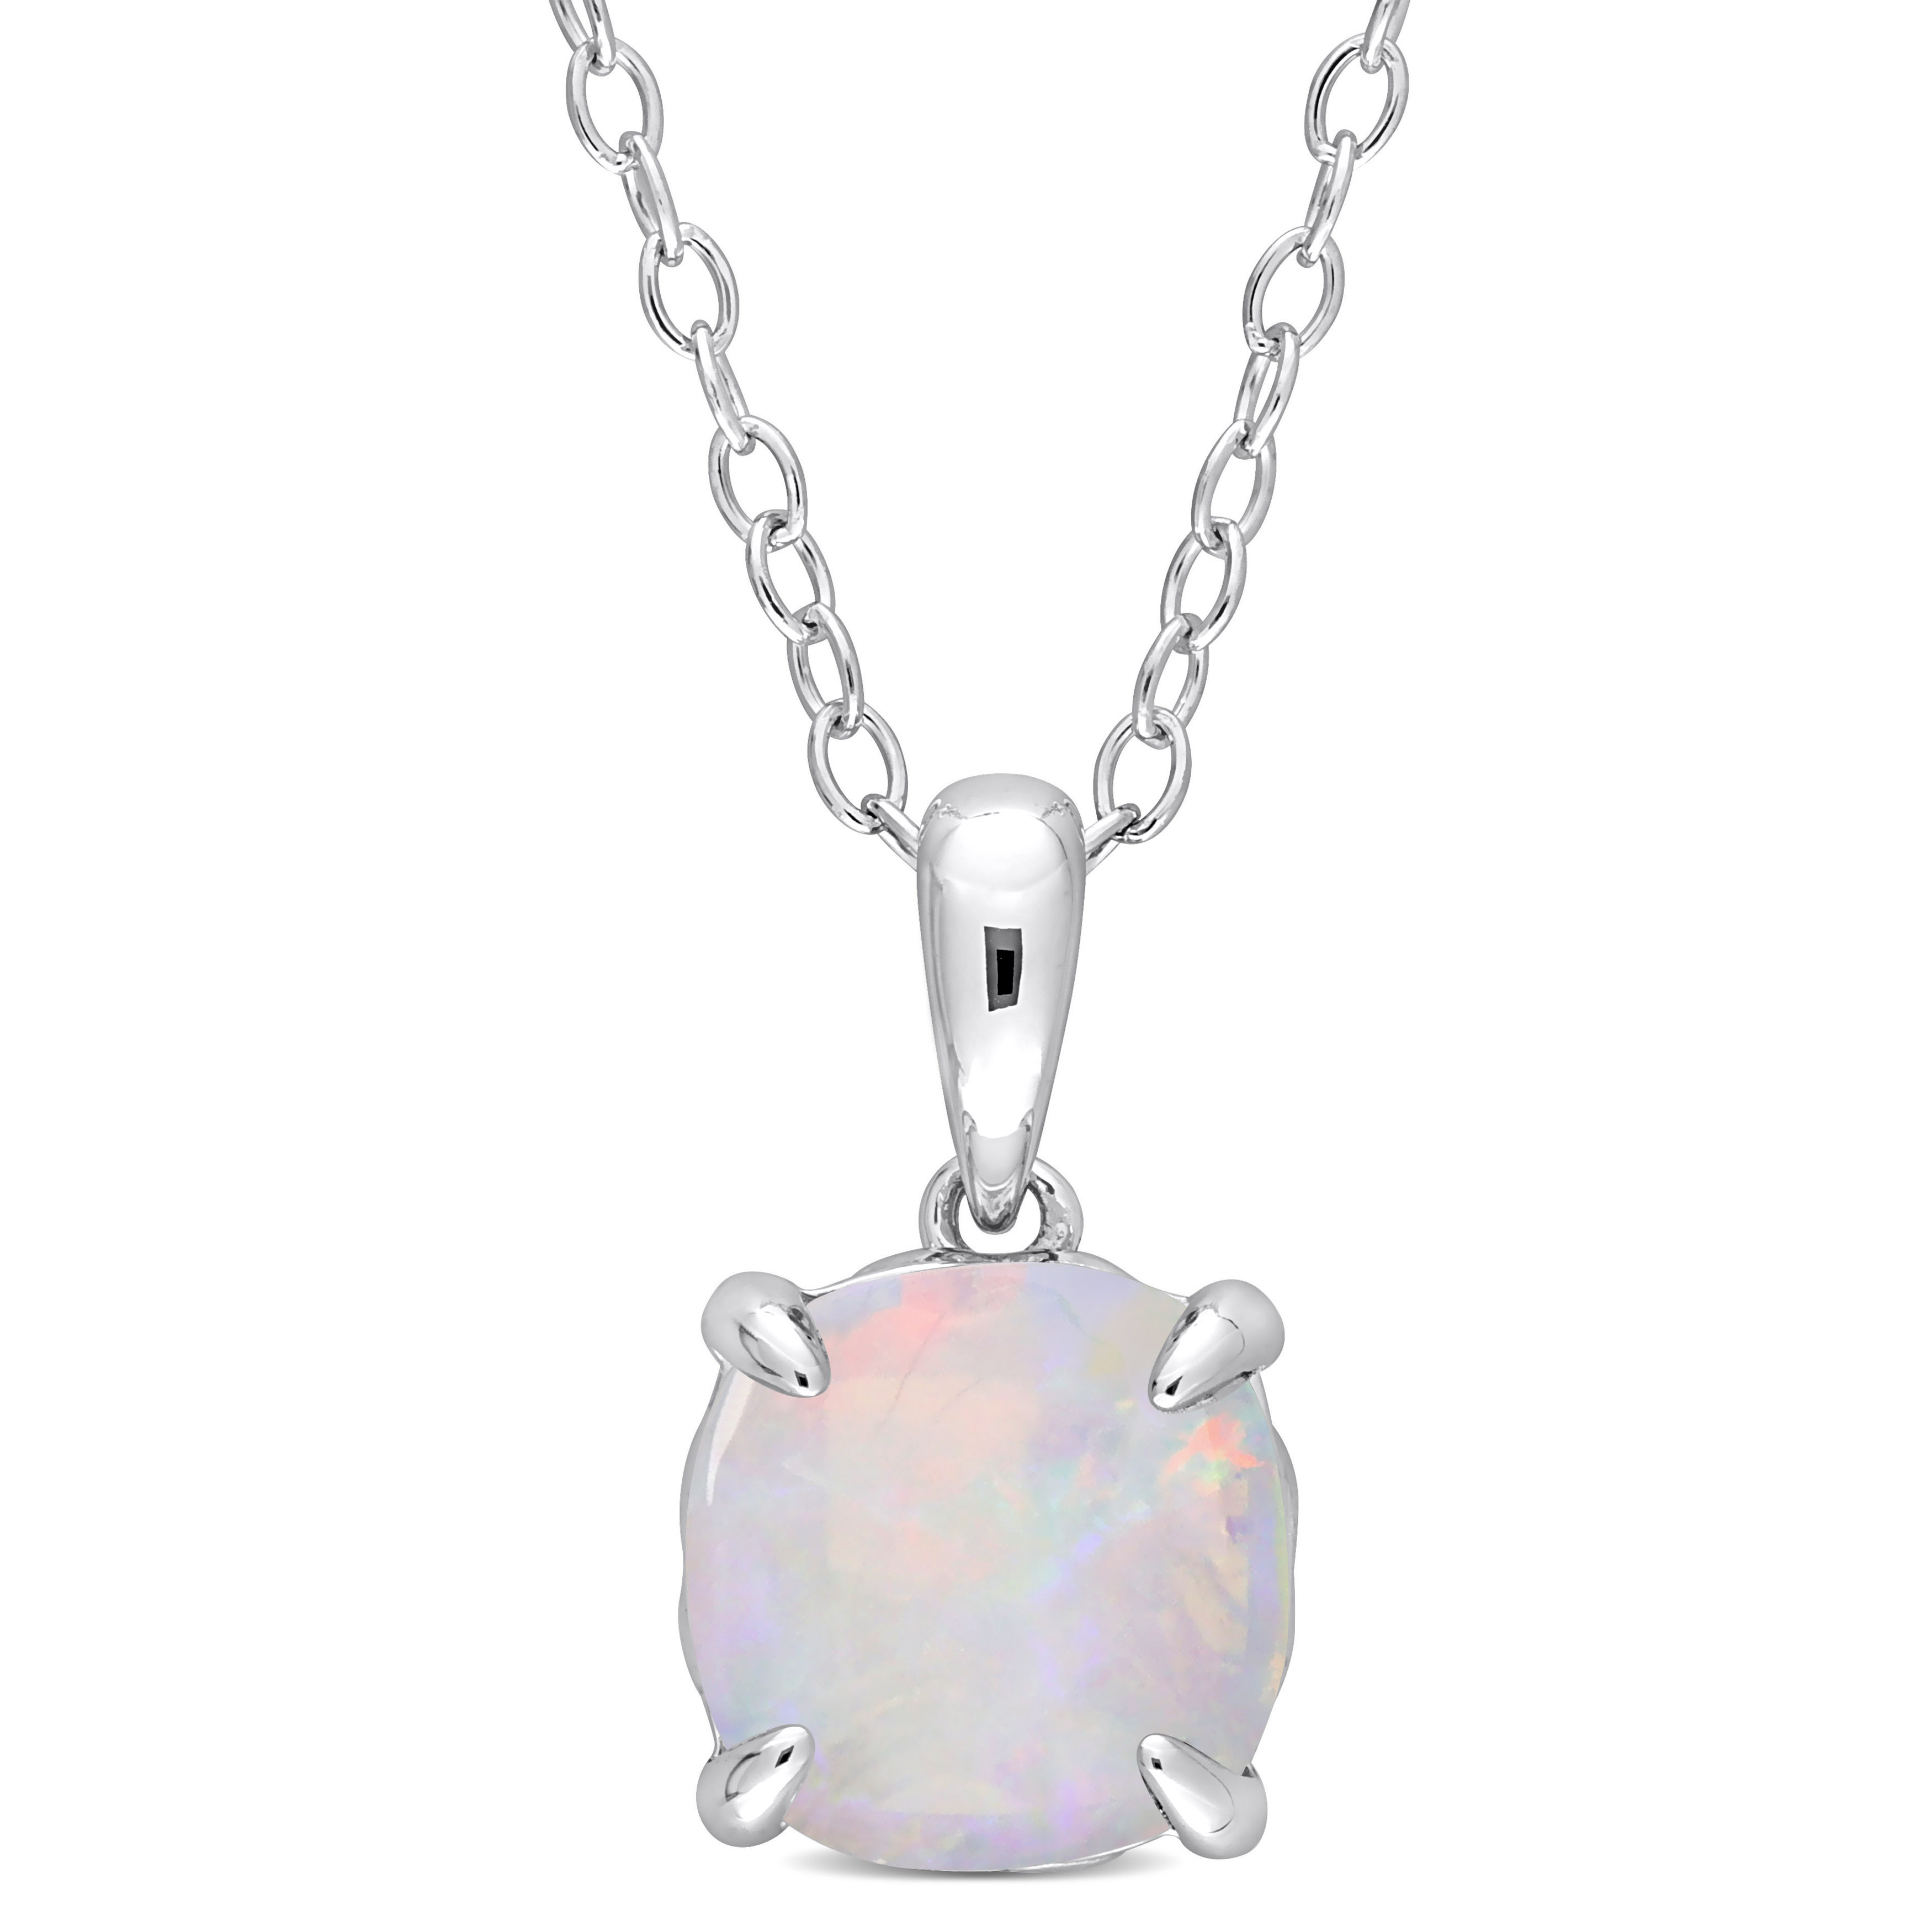 1 1/3 CT TGW Cushion Cut Opal Solitaire Heart Design Pendant with Chain in Sterling Silver - 18 in.